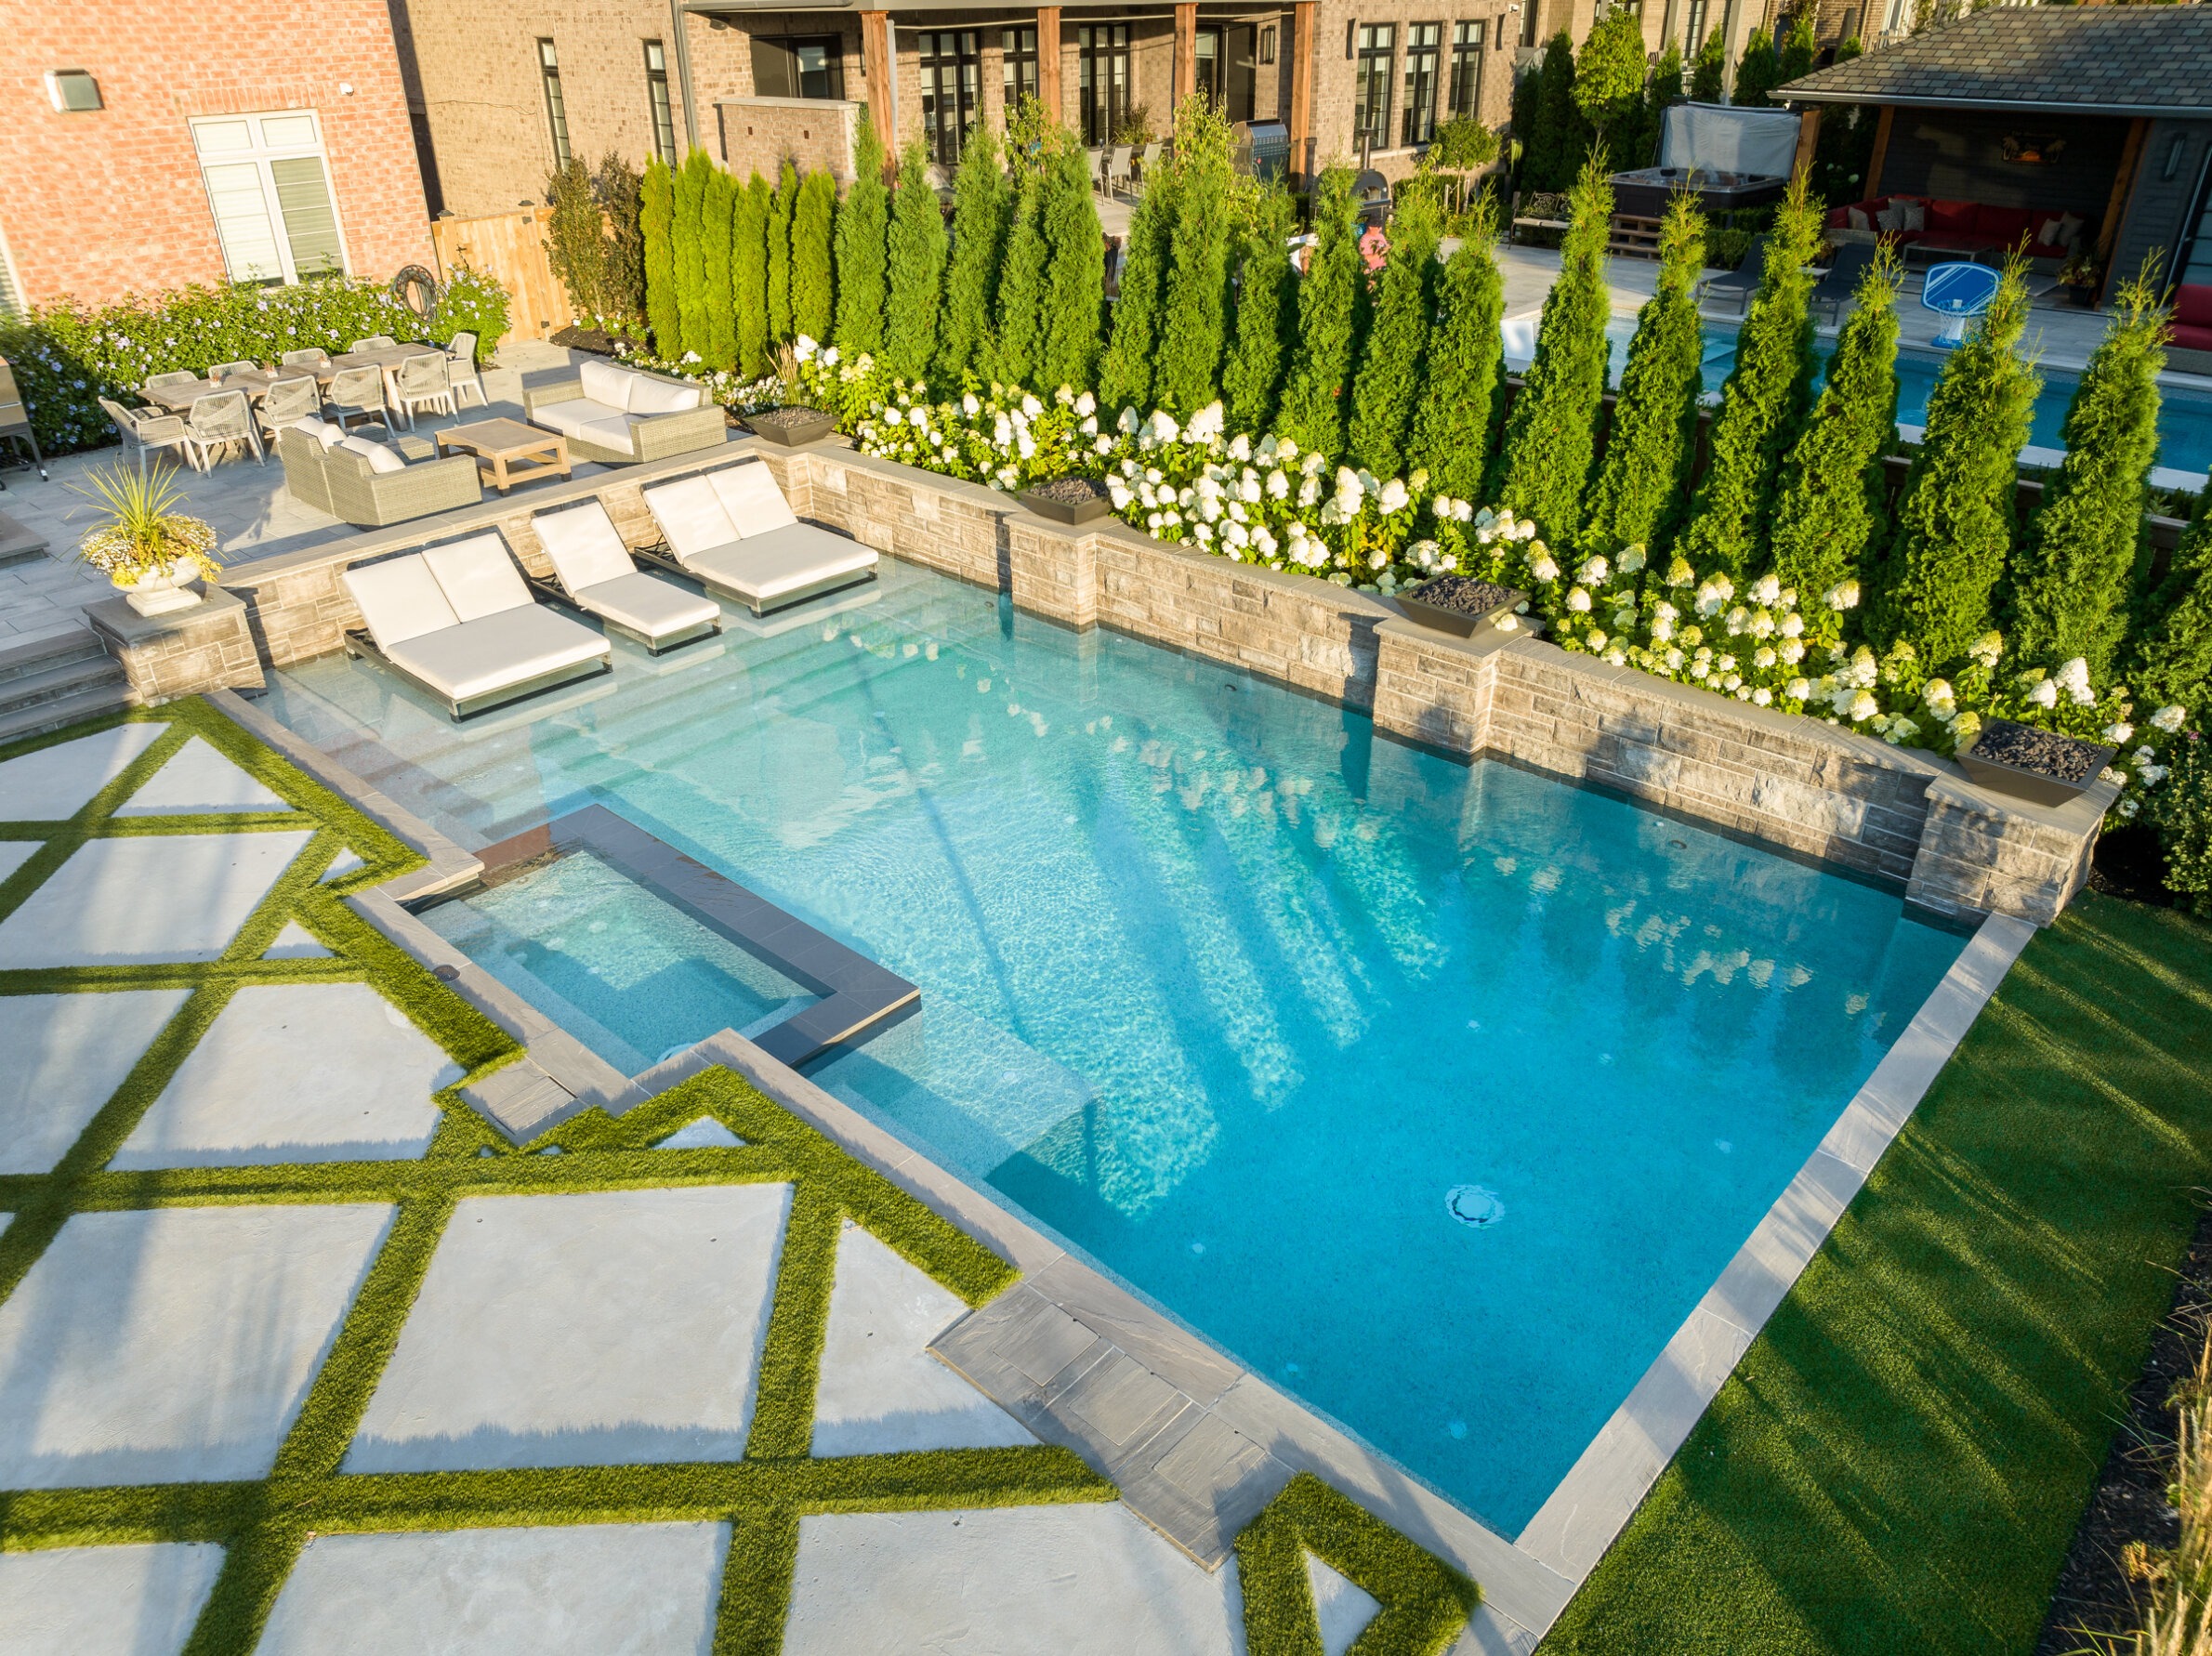 An outdoor swimming pool with clear blue water, surrounded by lounge chairs, greenery, and a well-manicured lawn with geometric patterns.